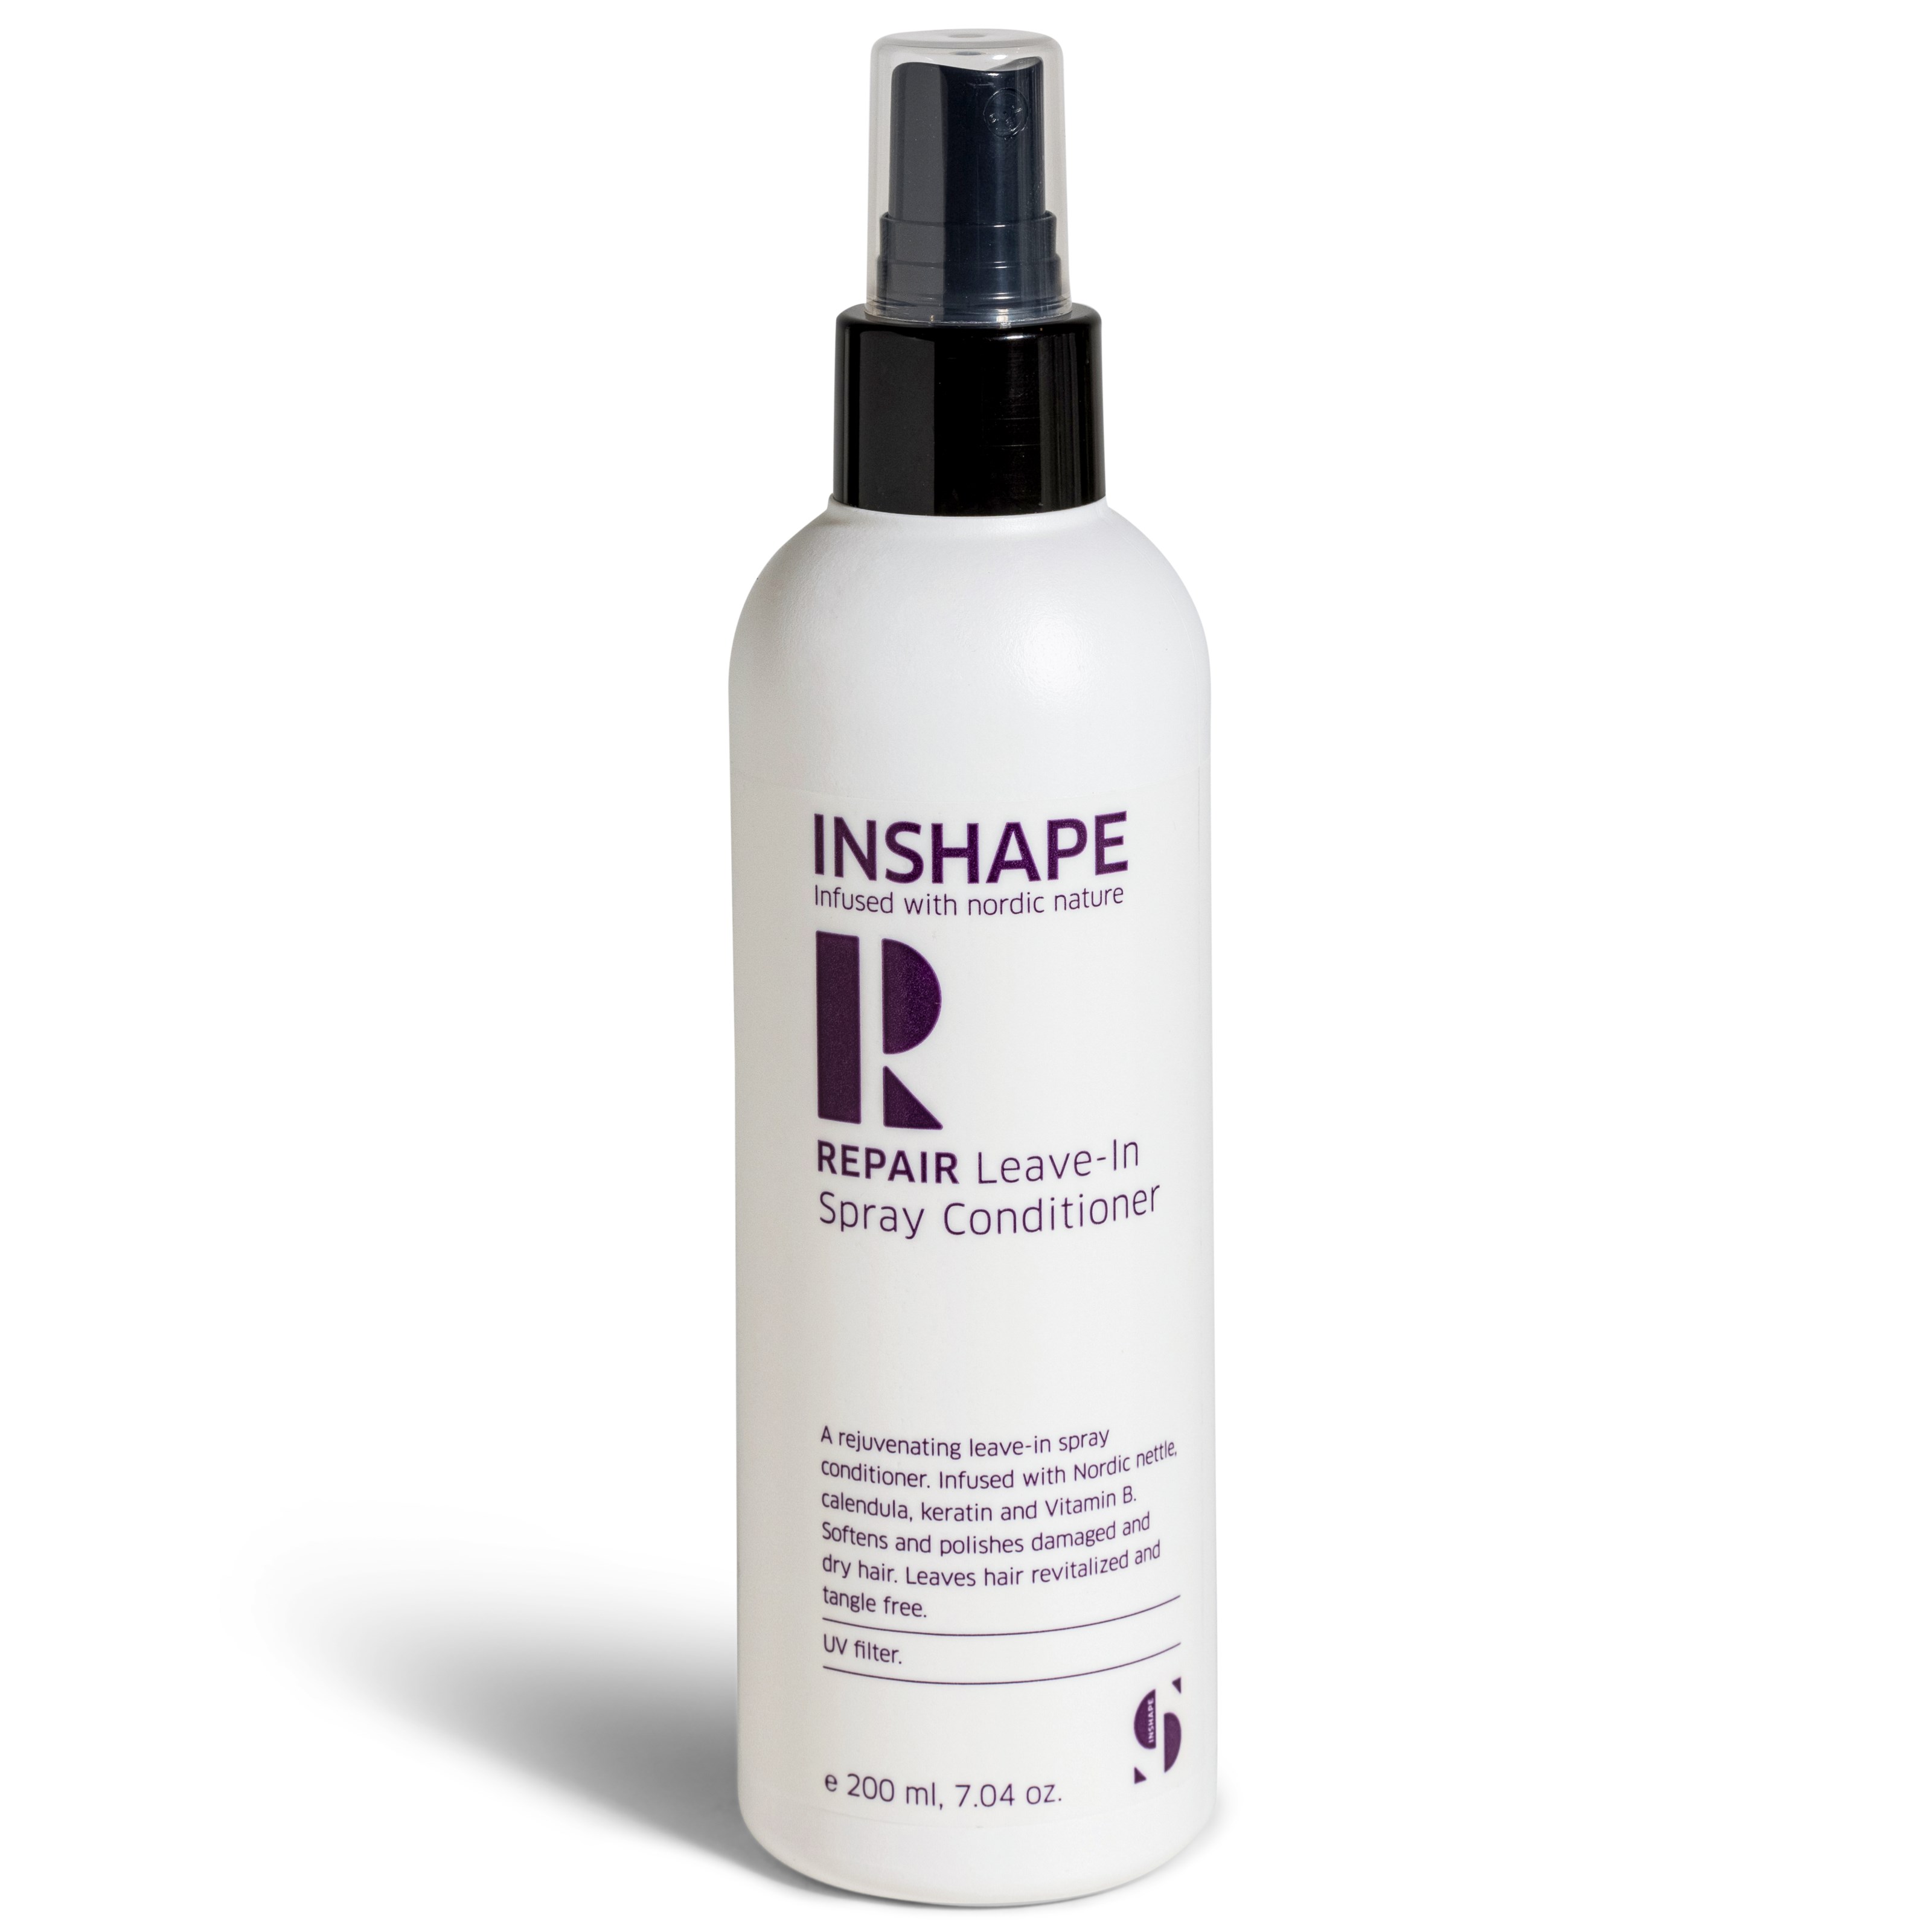 InShape Infused With Nordic Nature REPAIR Leave-In Spray Conditioner